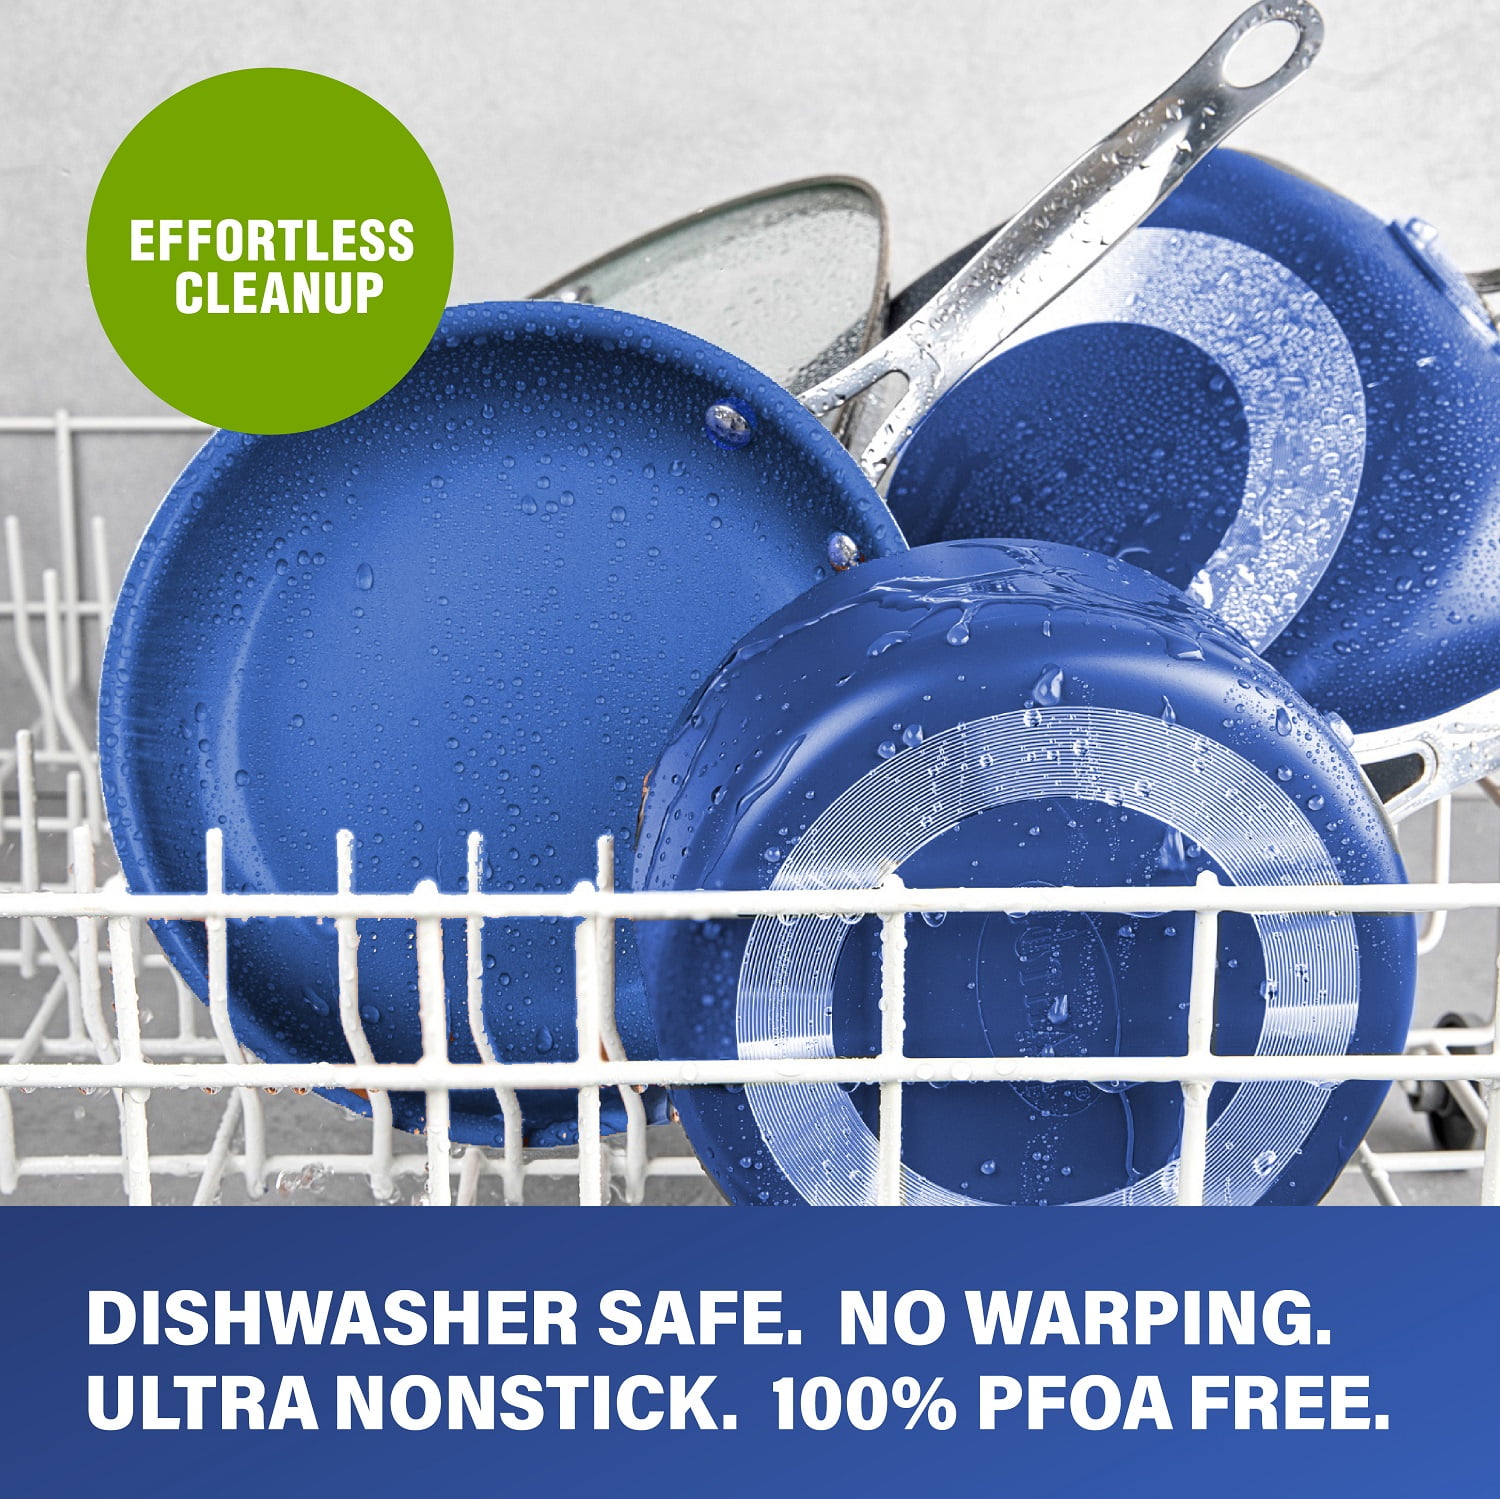 Reviews for GRANITESTONE Classic Blue 20-Piece Aluminum Ultra-Durable  Non-Stick Diamond Infused Cookware and Bakeware Set